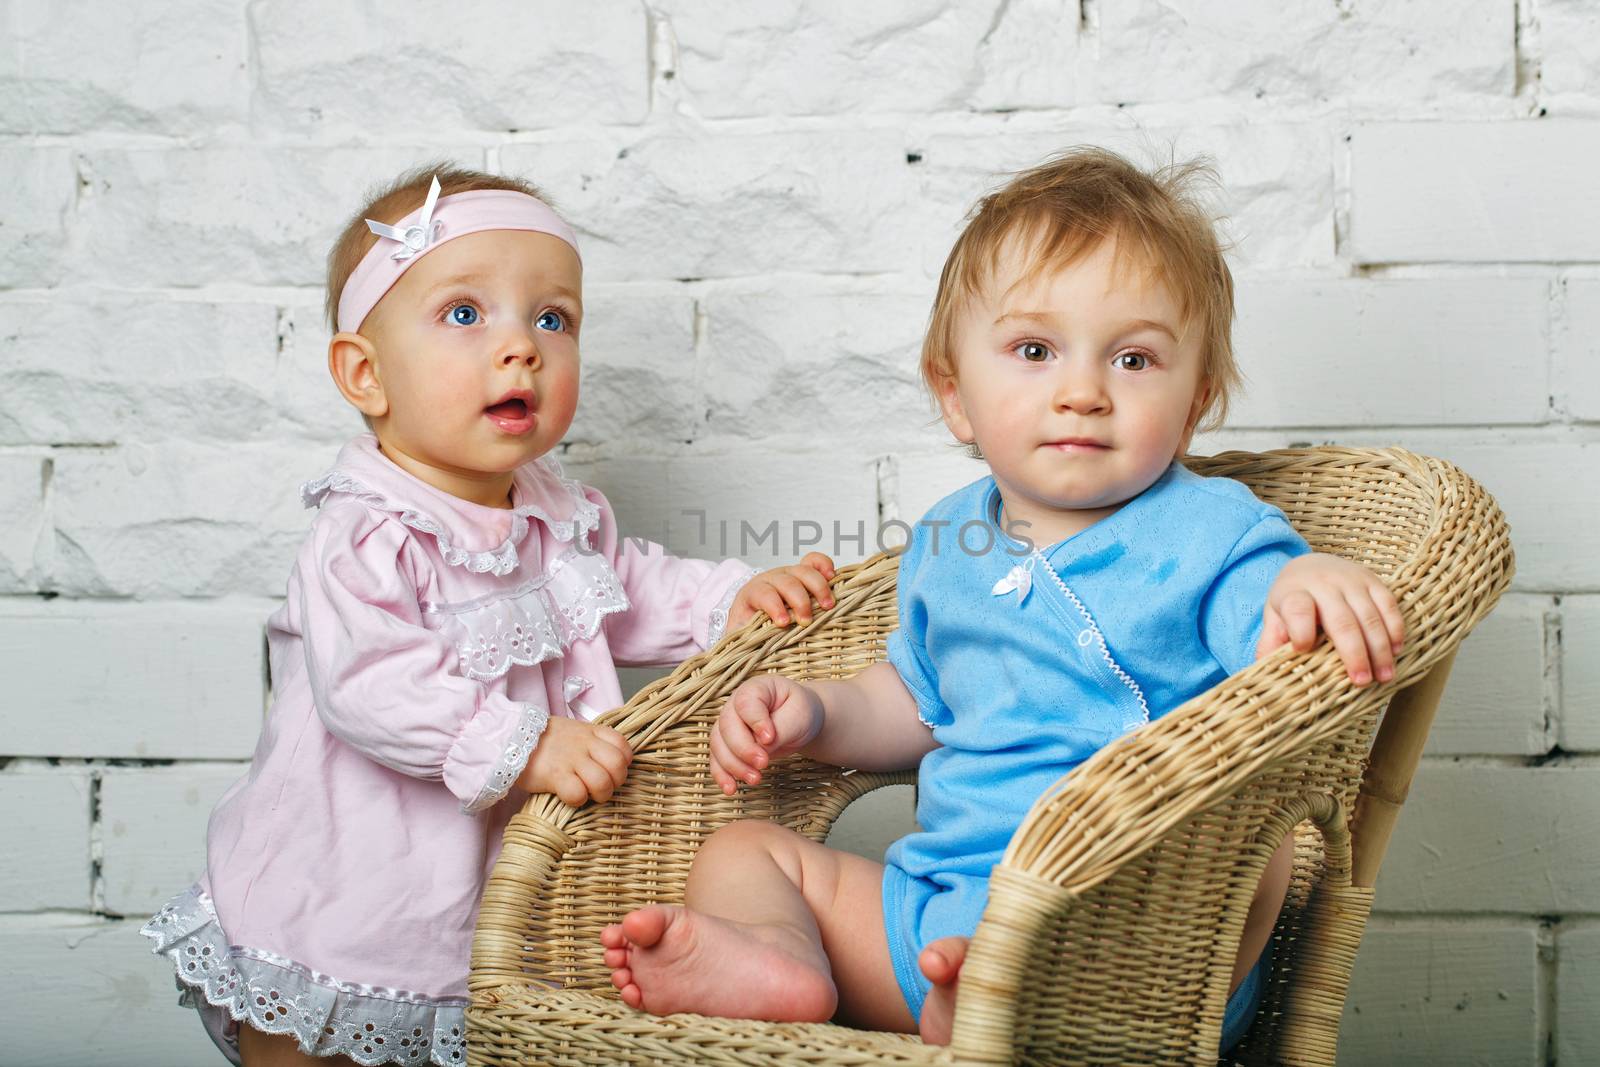 Brother and sister playing in the backyard next to the wicker chair